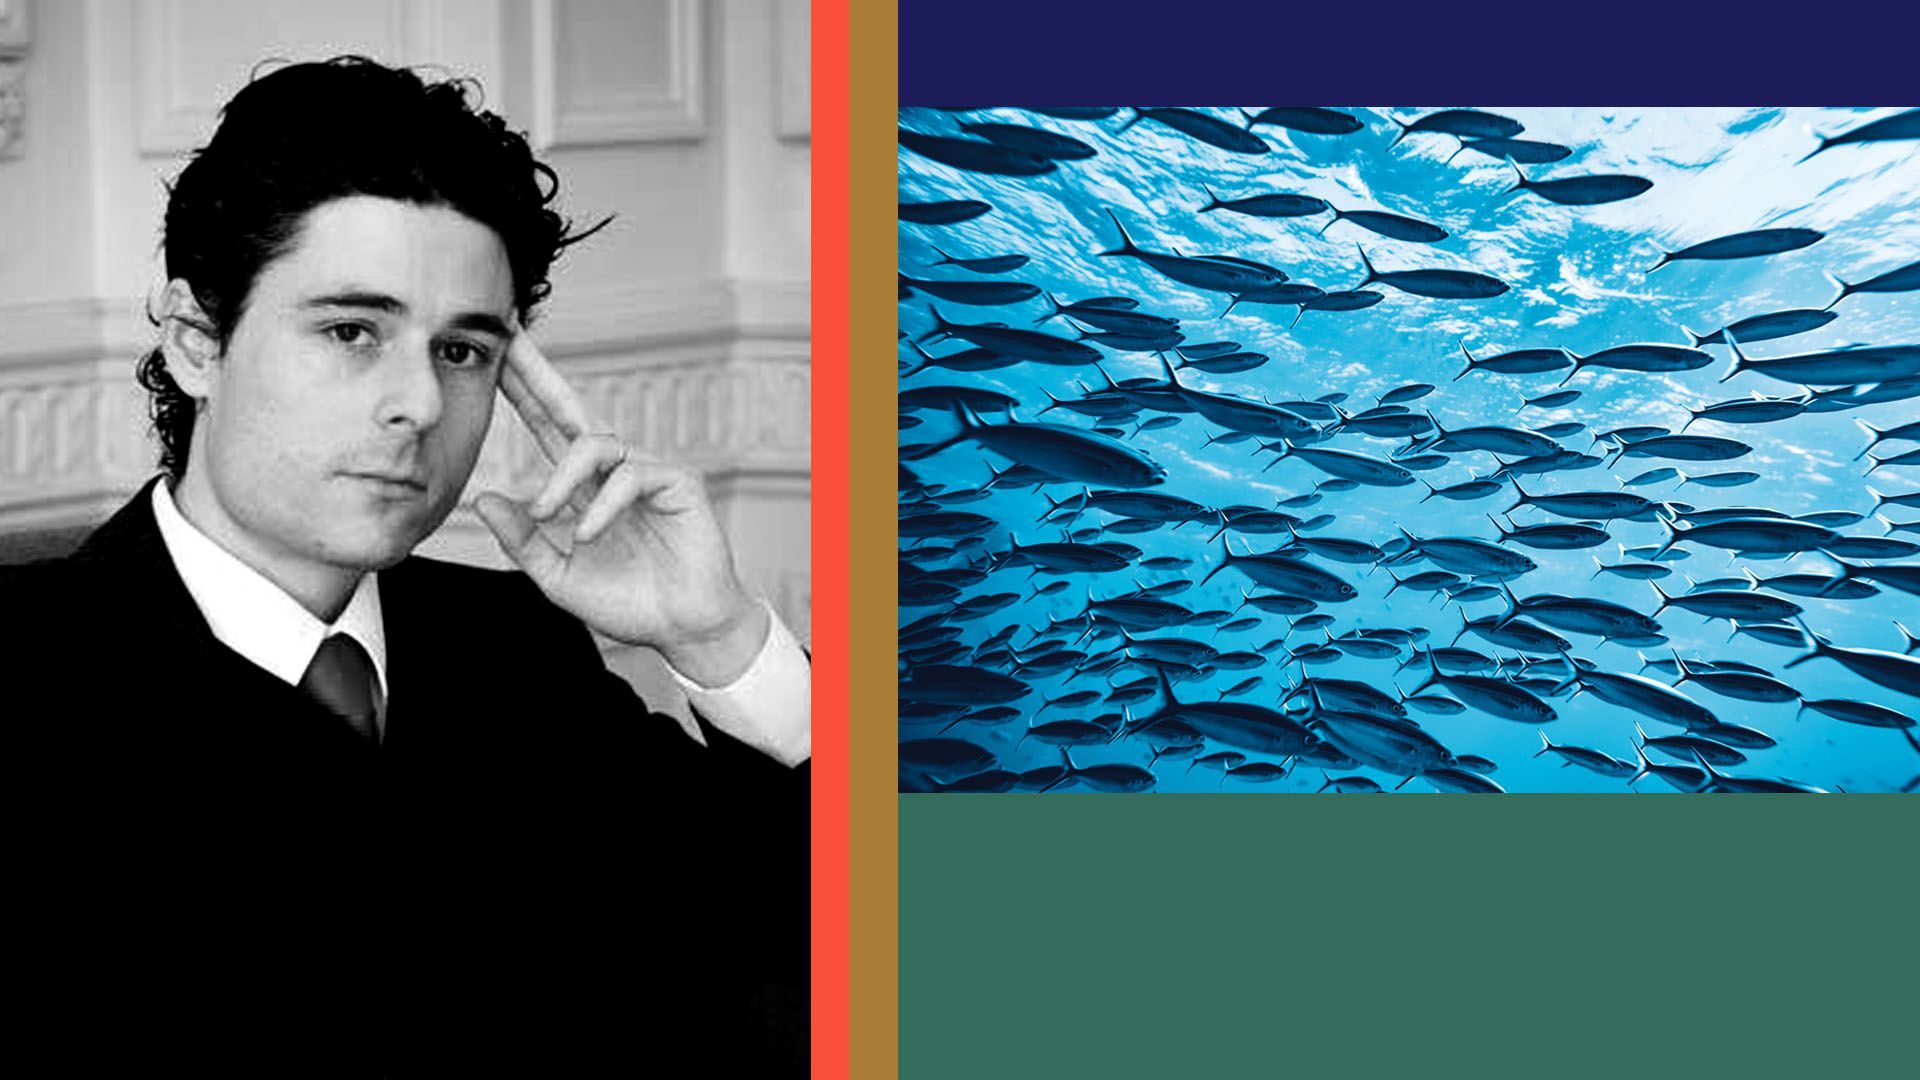 Photo collage of Pablo Ferrara and a school of fish